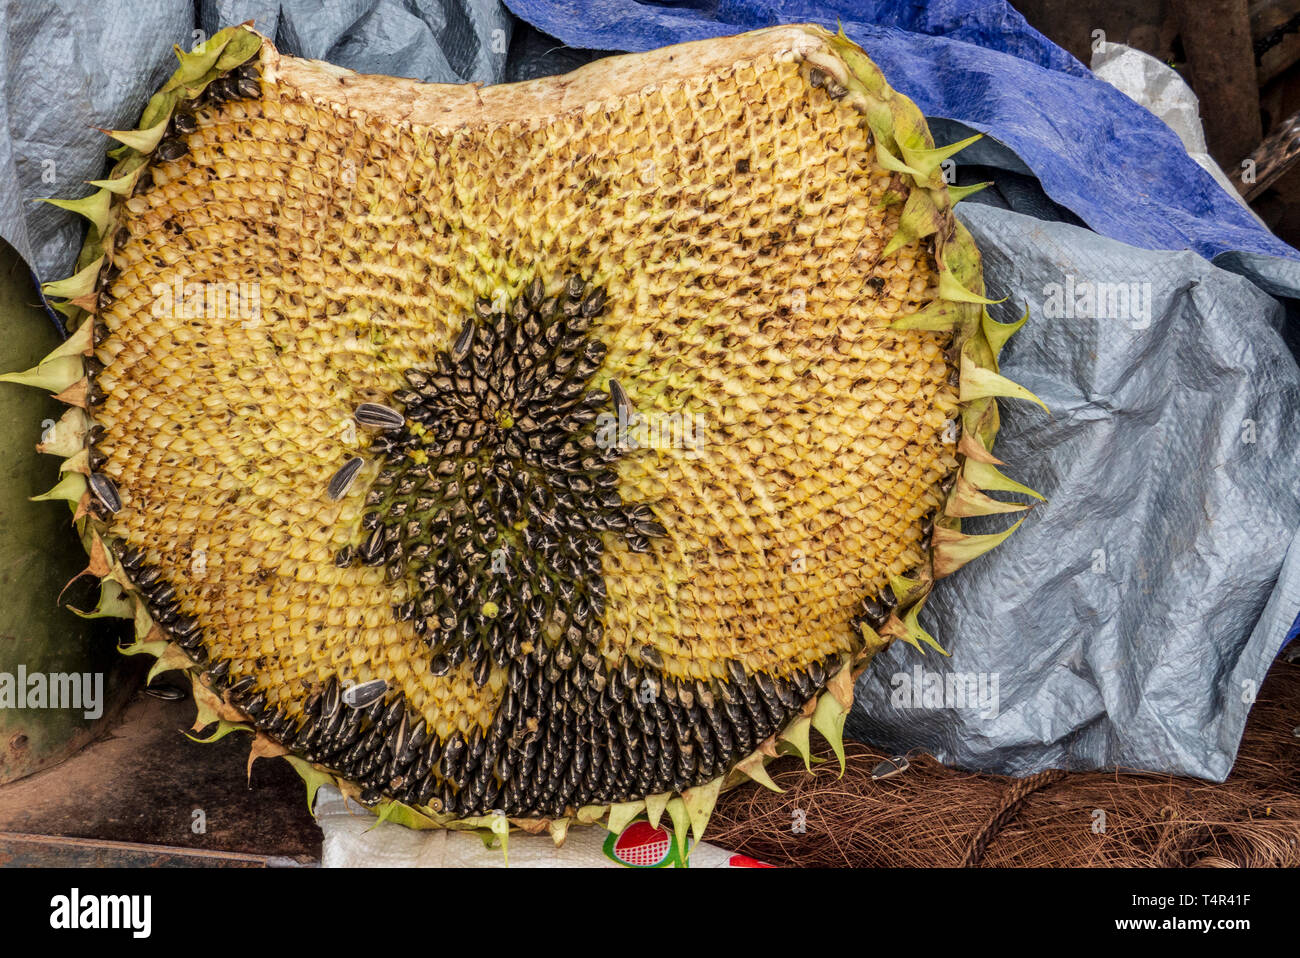 Sunflower seeds in a sunflower. Photographed at Lijiang, Yunnan, China Stock Photo